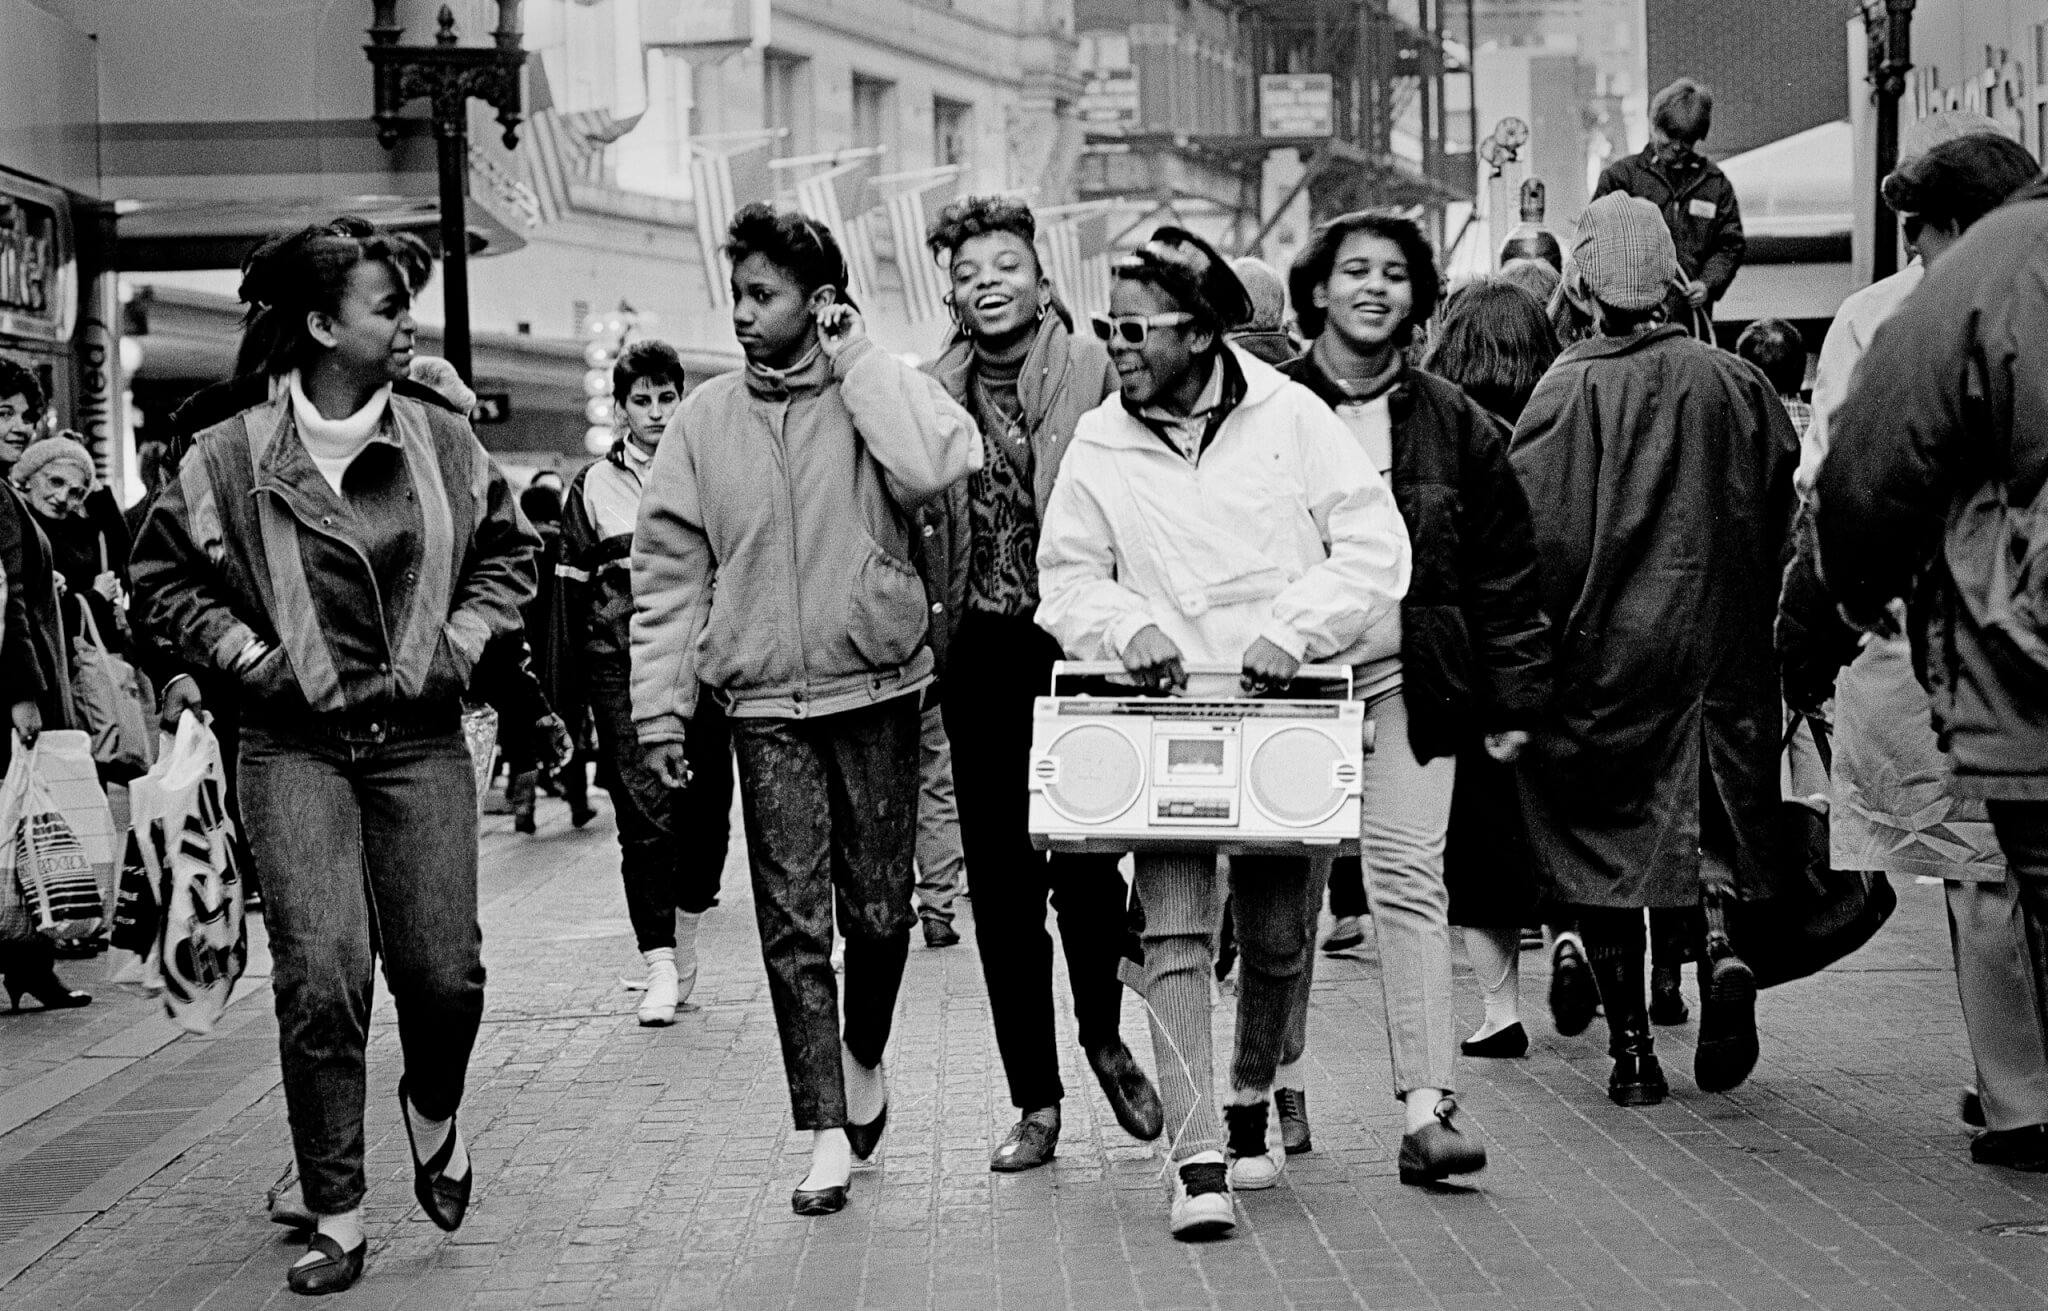 Image of "Young women with boombox in Downtown Crossing, 1986" by John Nordell